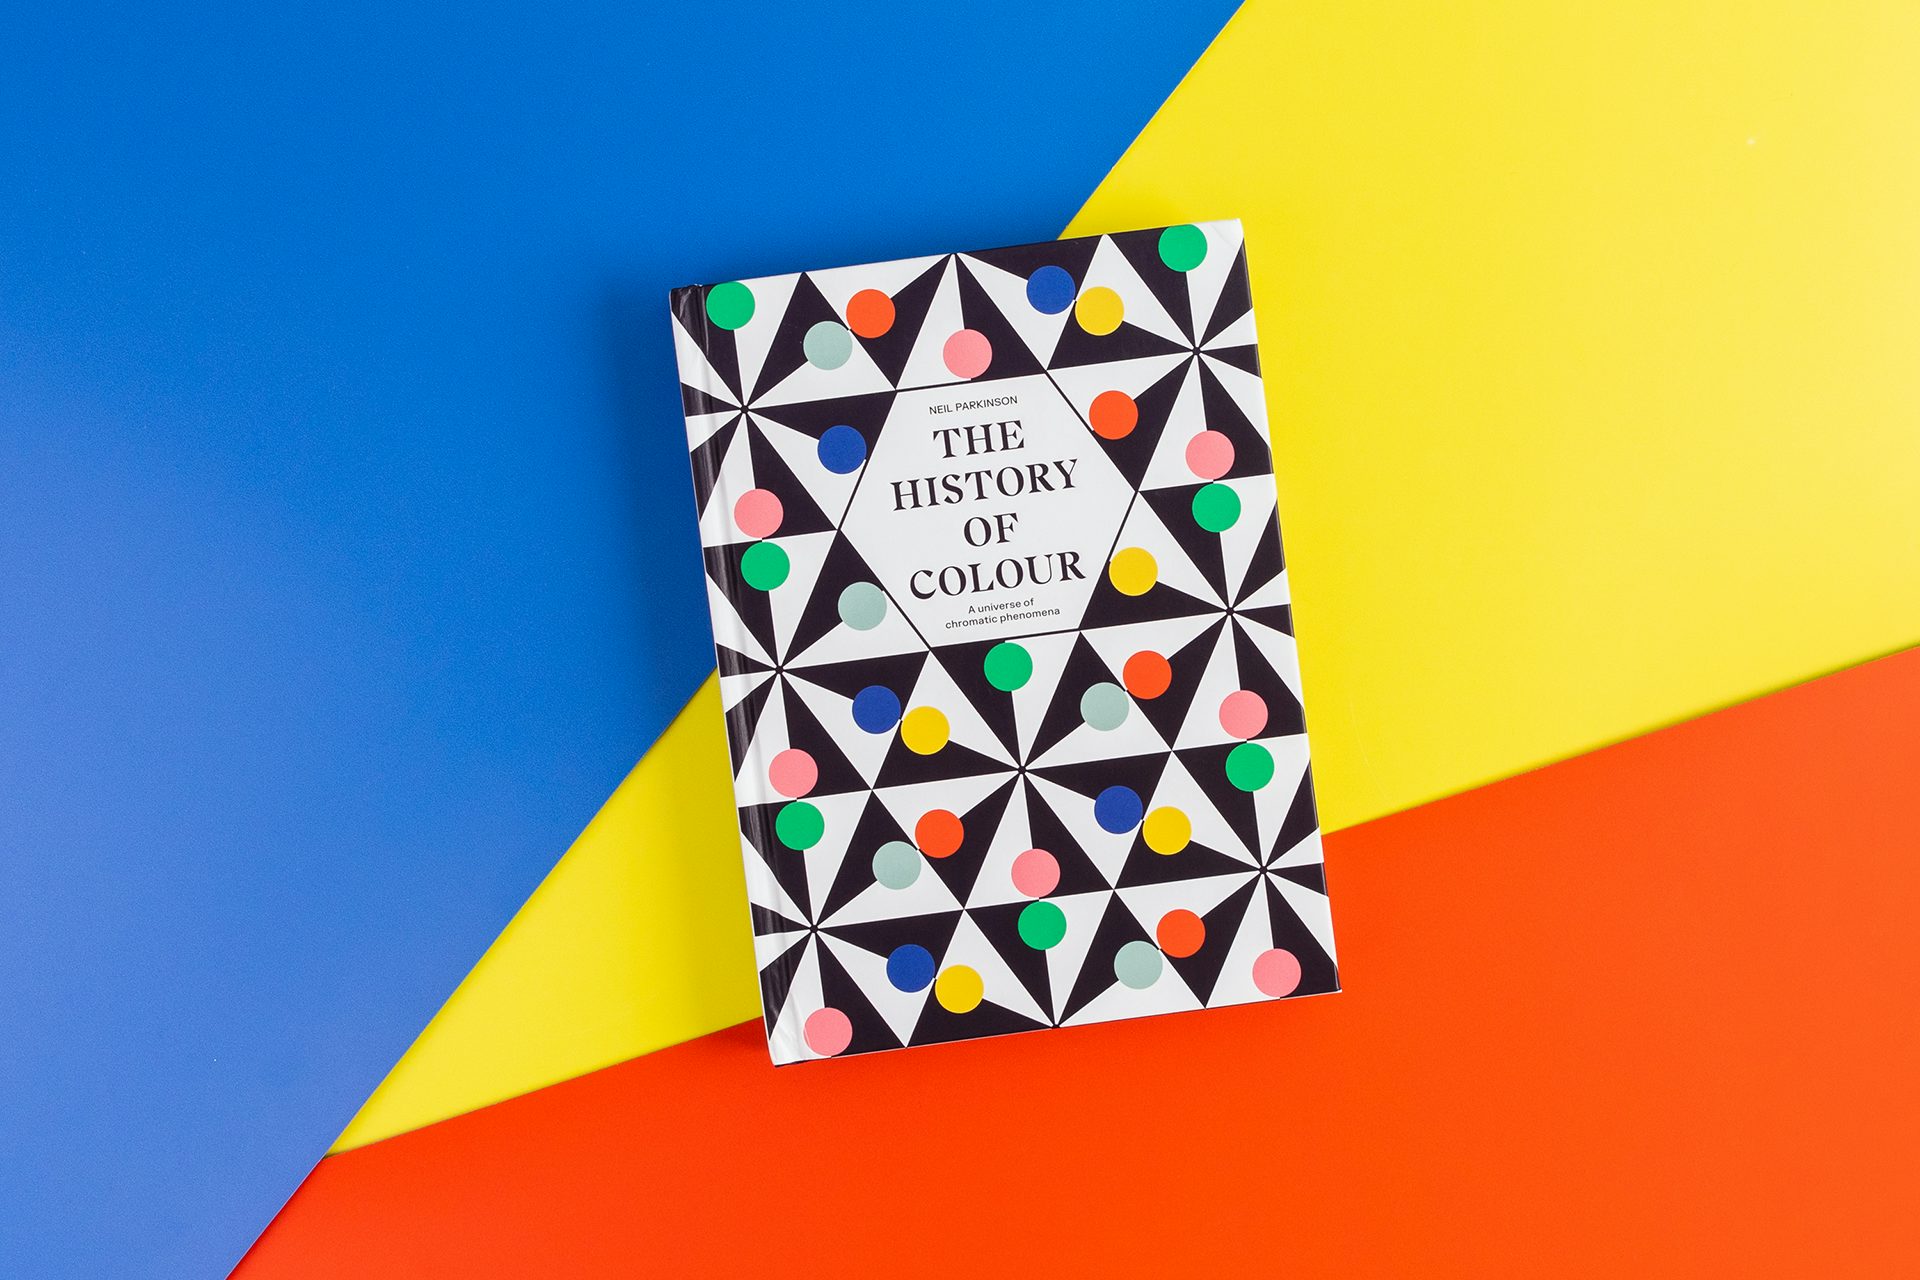 Image shows the cover of The History of Colour book, featuring a geometric and polka dot cover, arranged on a blue, yellow and red geometric background